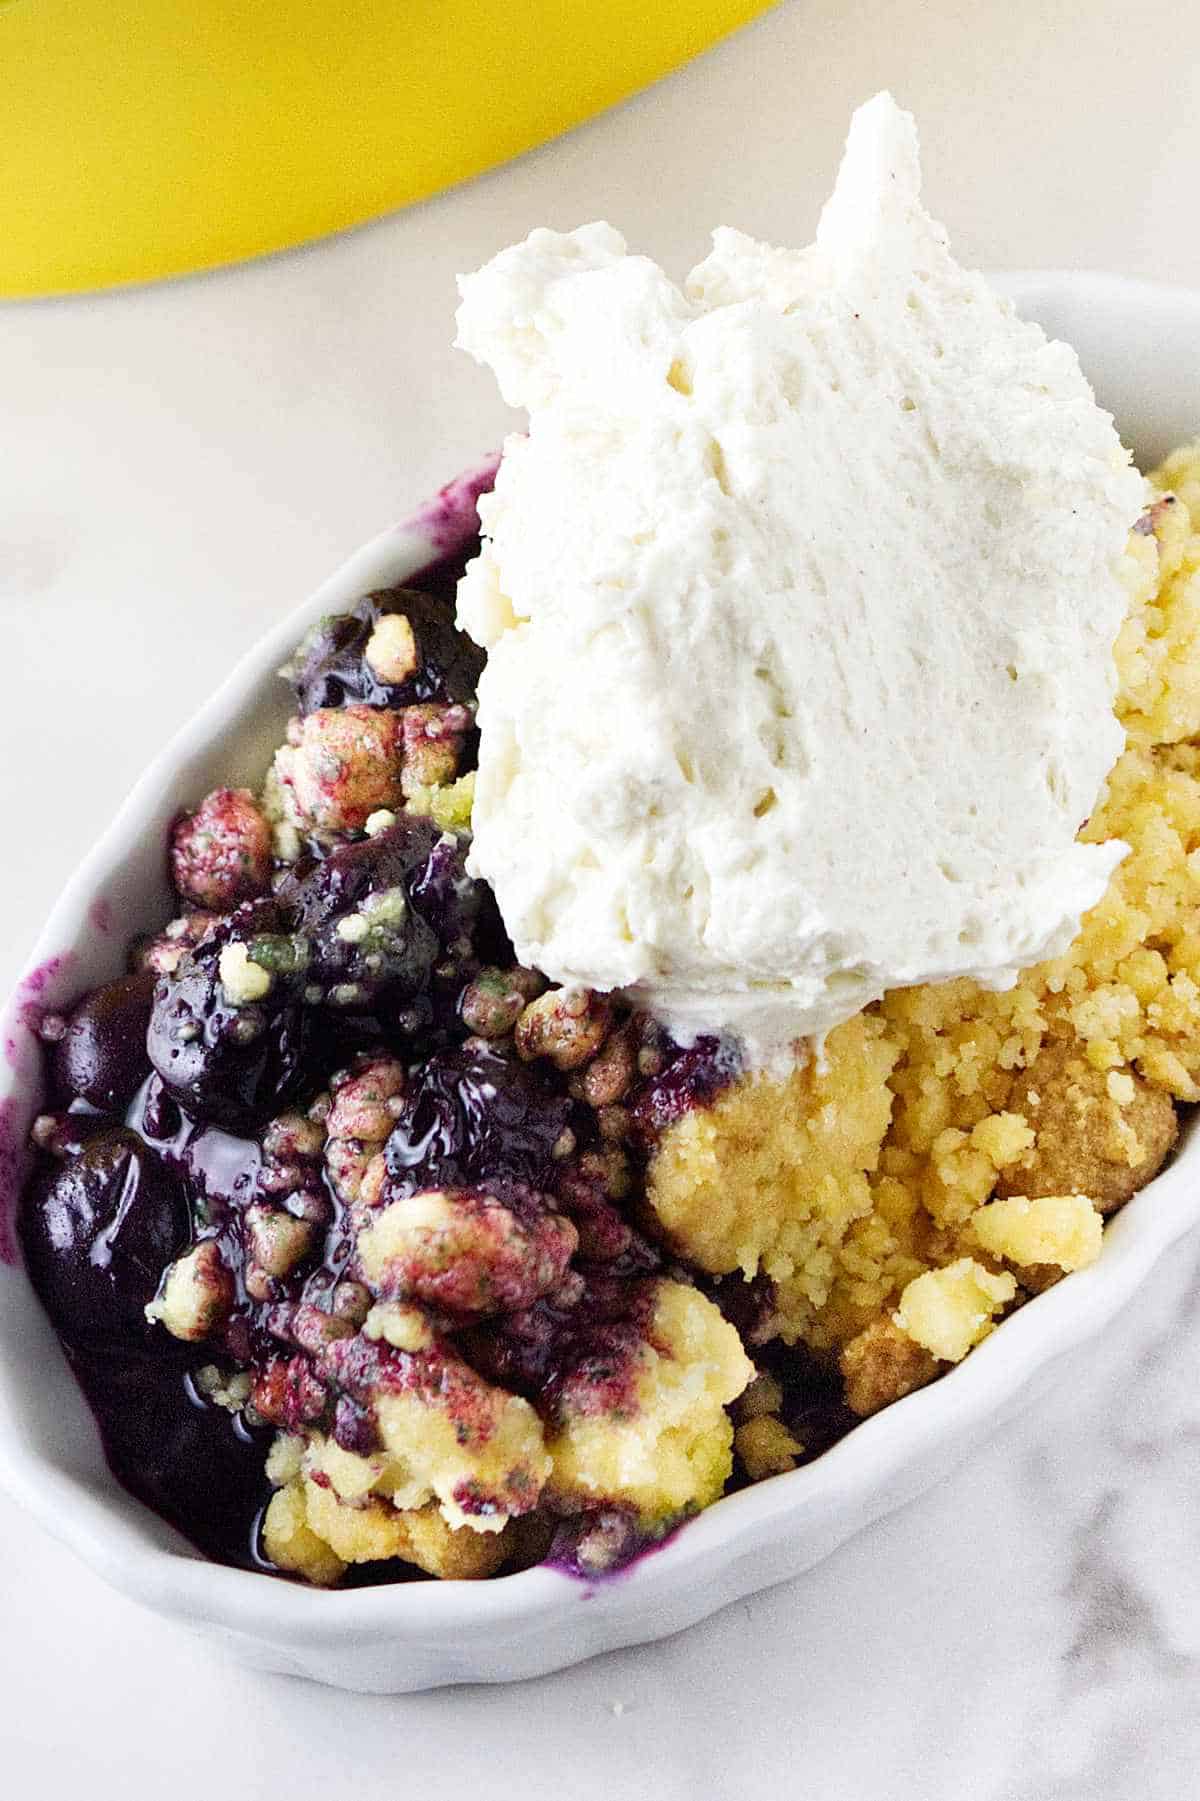 serving of blueberry cobbler with whipped cream on top.